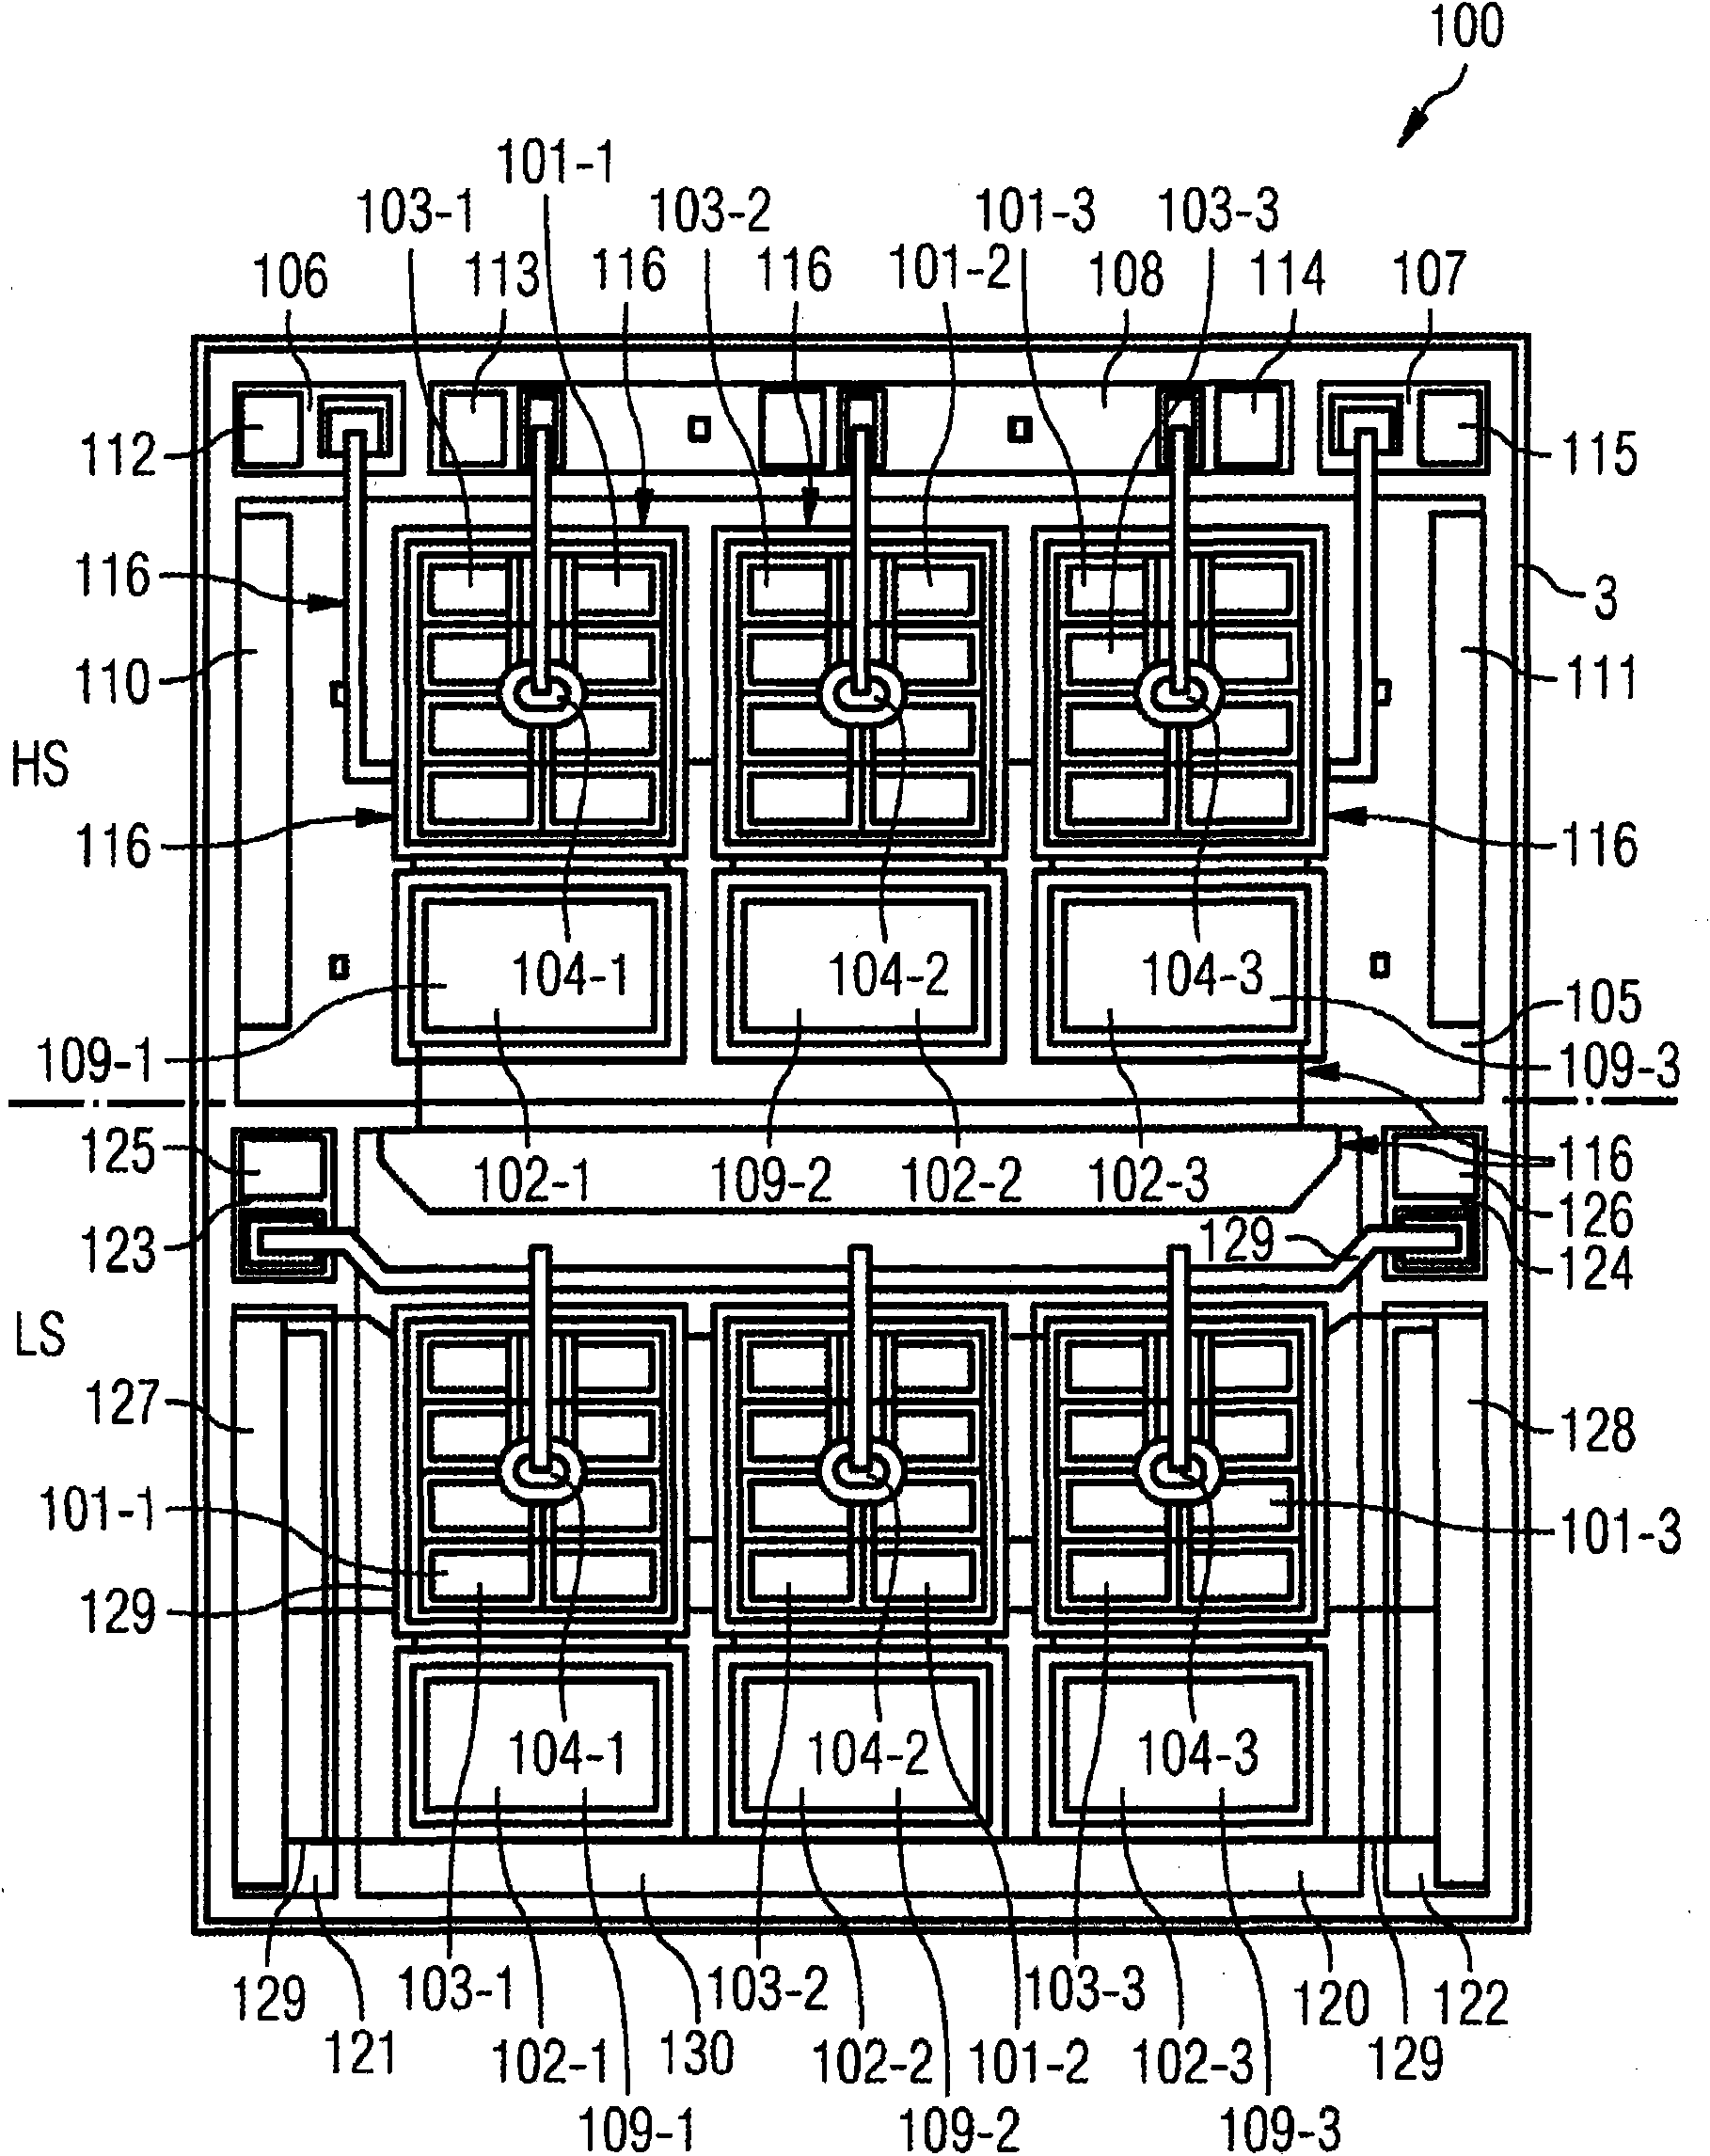 Arrangement comprising at least one semiconductor component, in particular a power semiconductor component for the power control of high currents